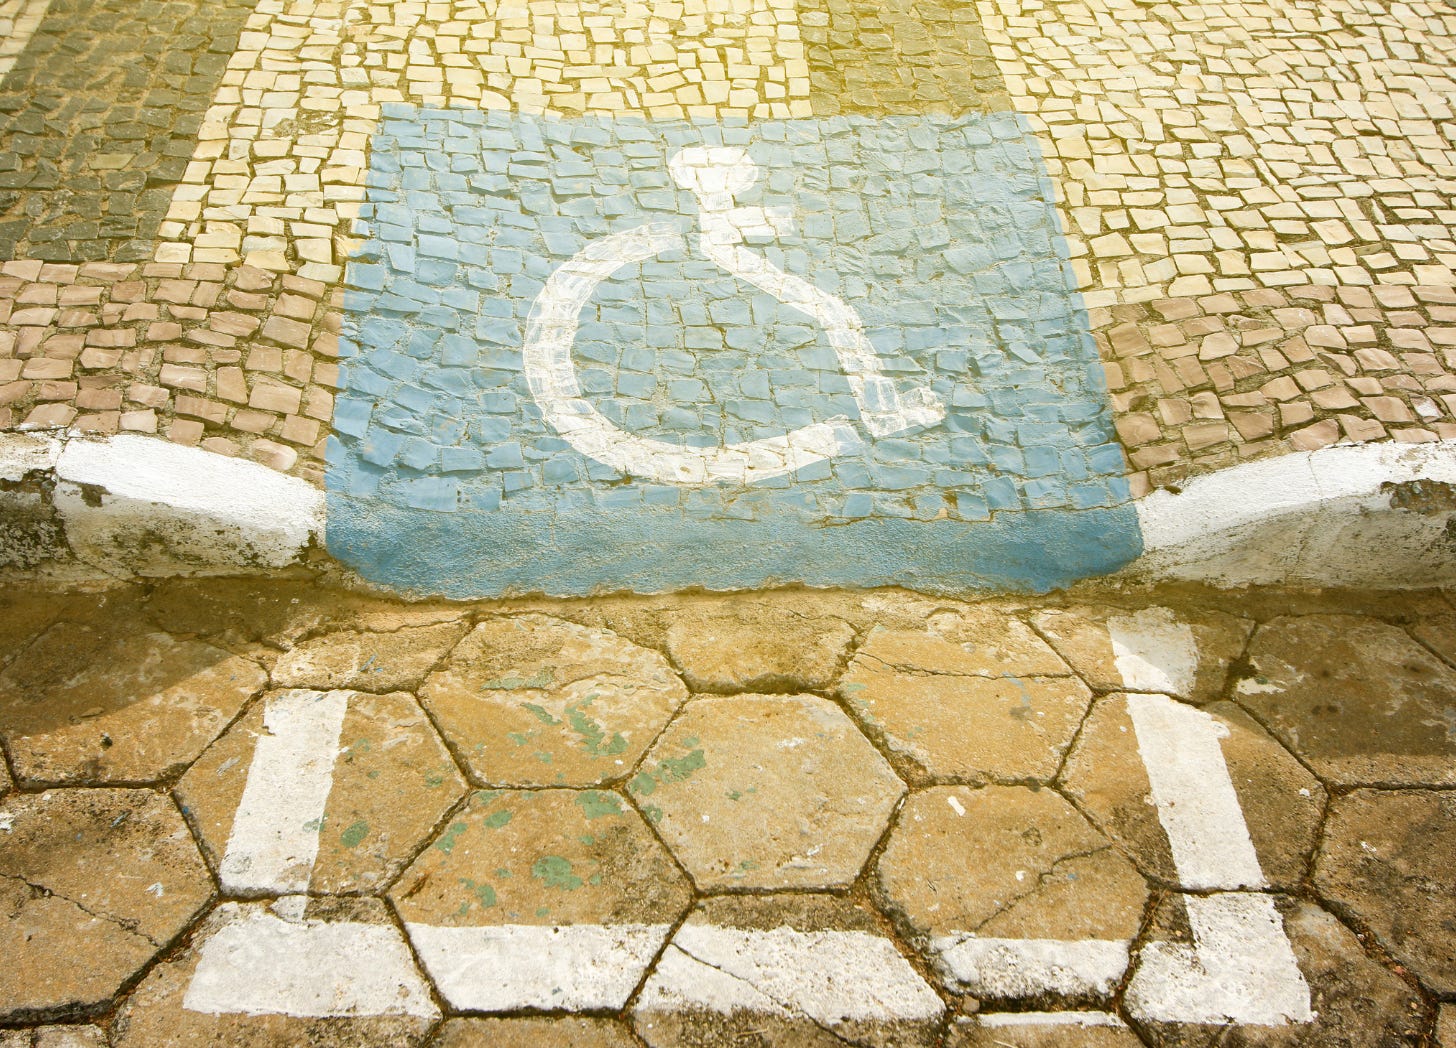 Wheelchair symbol sloppily painted onto a rough curb cut